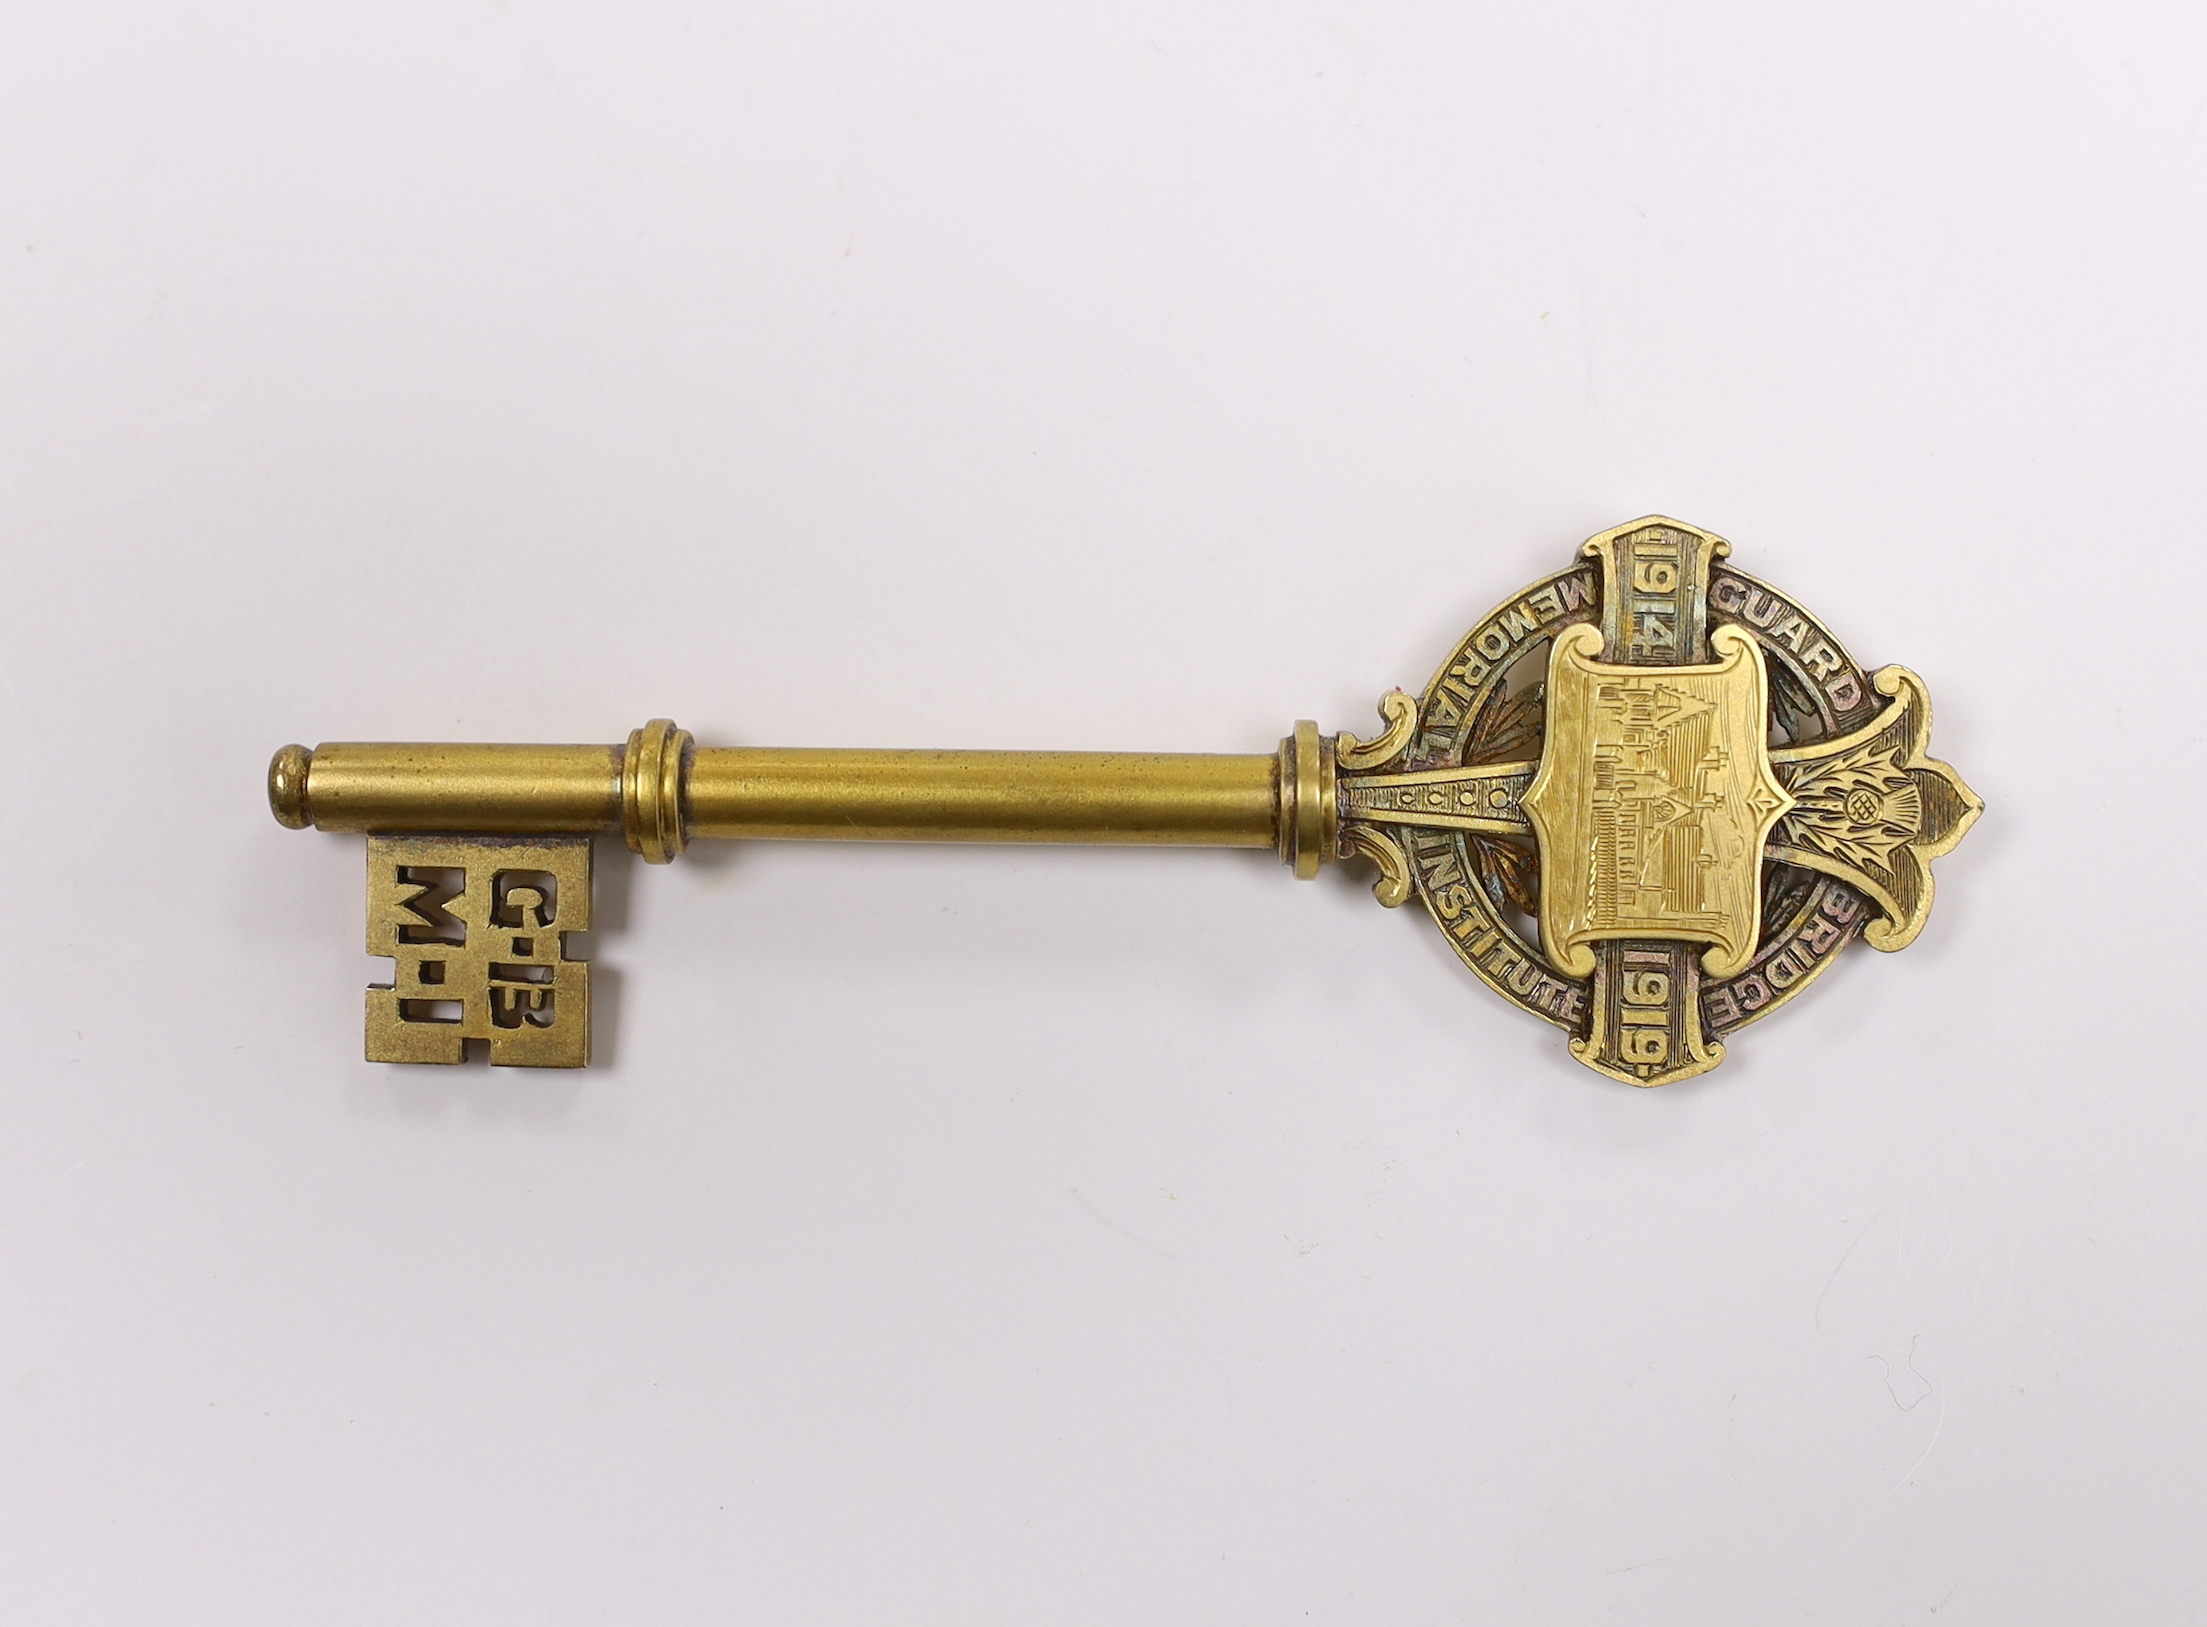 A cased gilt presentation key for the Guard Bridge Memorial Institute 1914 to 1919, presented by the architects, James Gillespie and Scott to W.D. Dixon, in fitted case, key 10.5cm